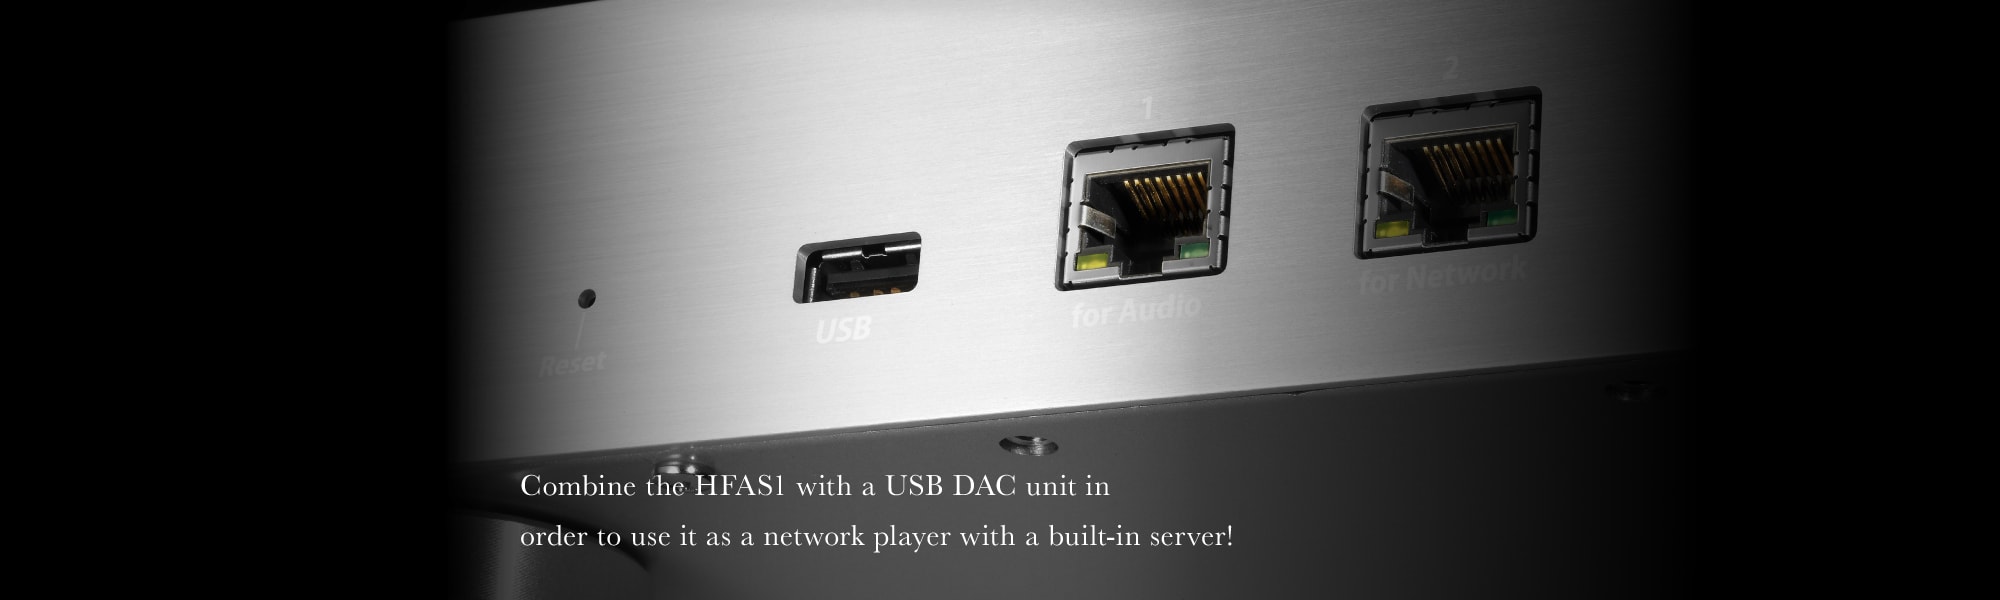 Combine the HFAS1 with a USB DAC unit in order to use it as a network player with a built-in server!